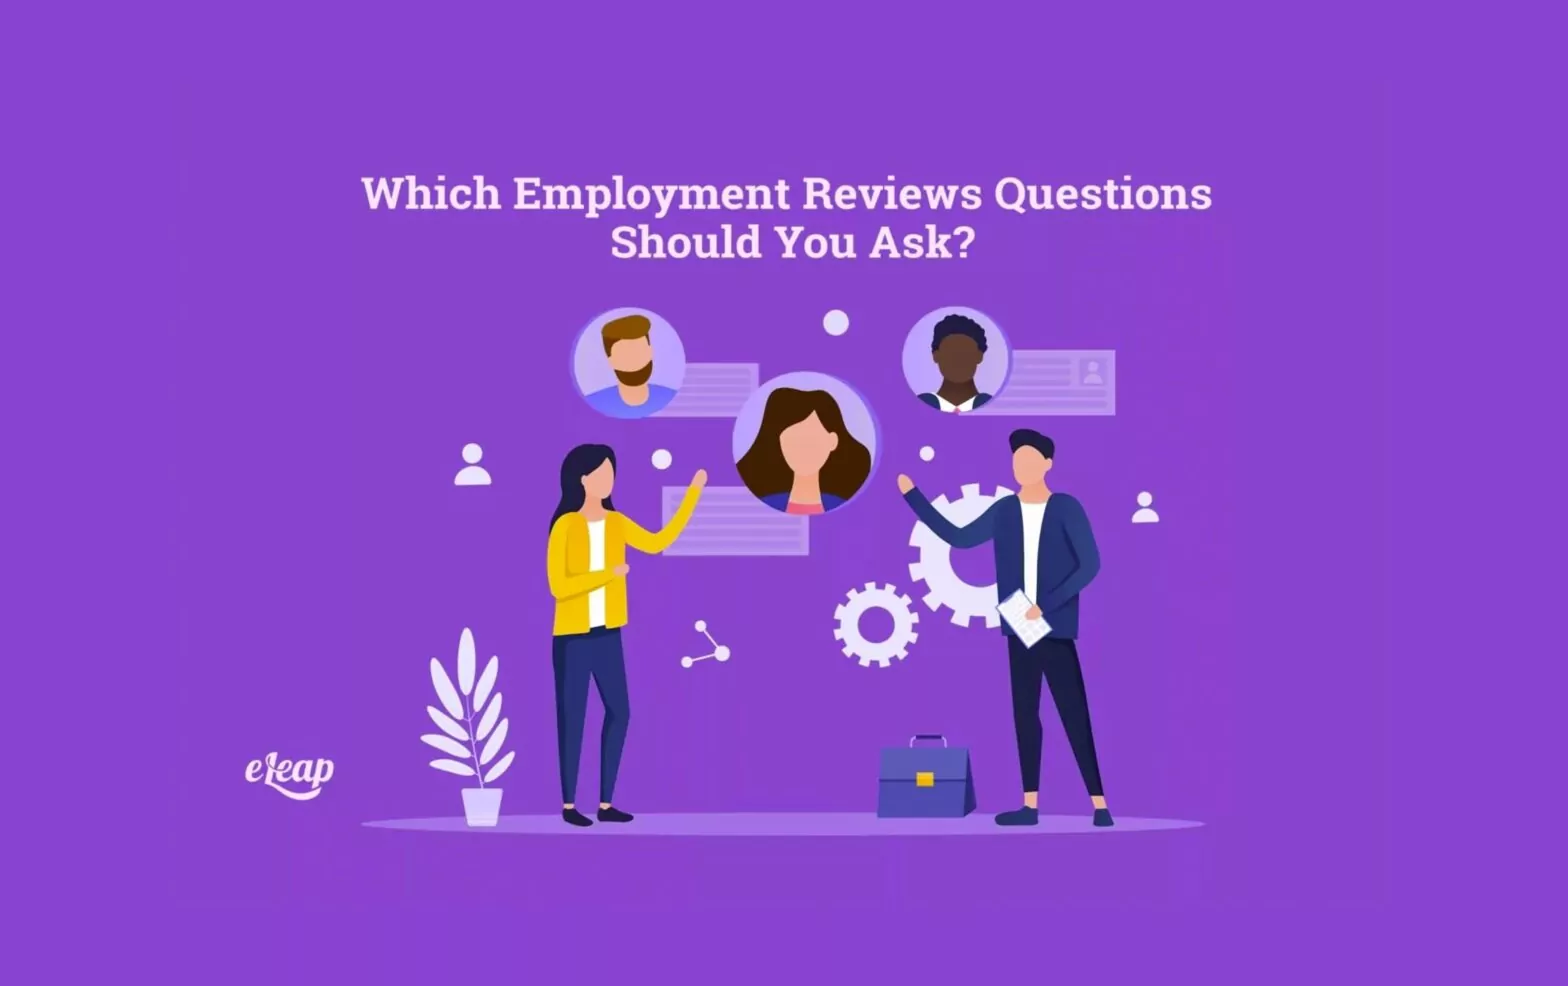 Which Employment Reviews Questions Should You Ask?